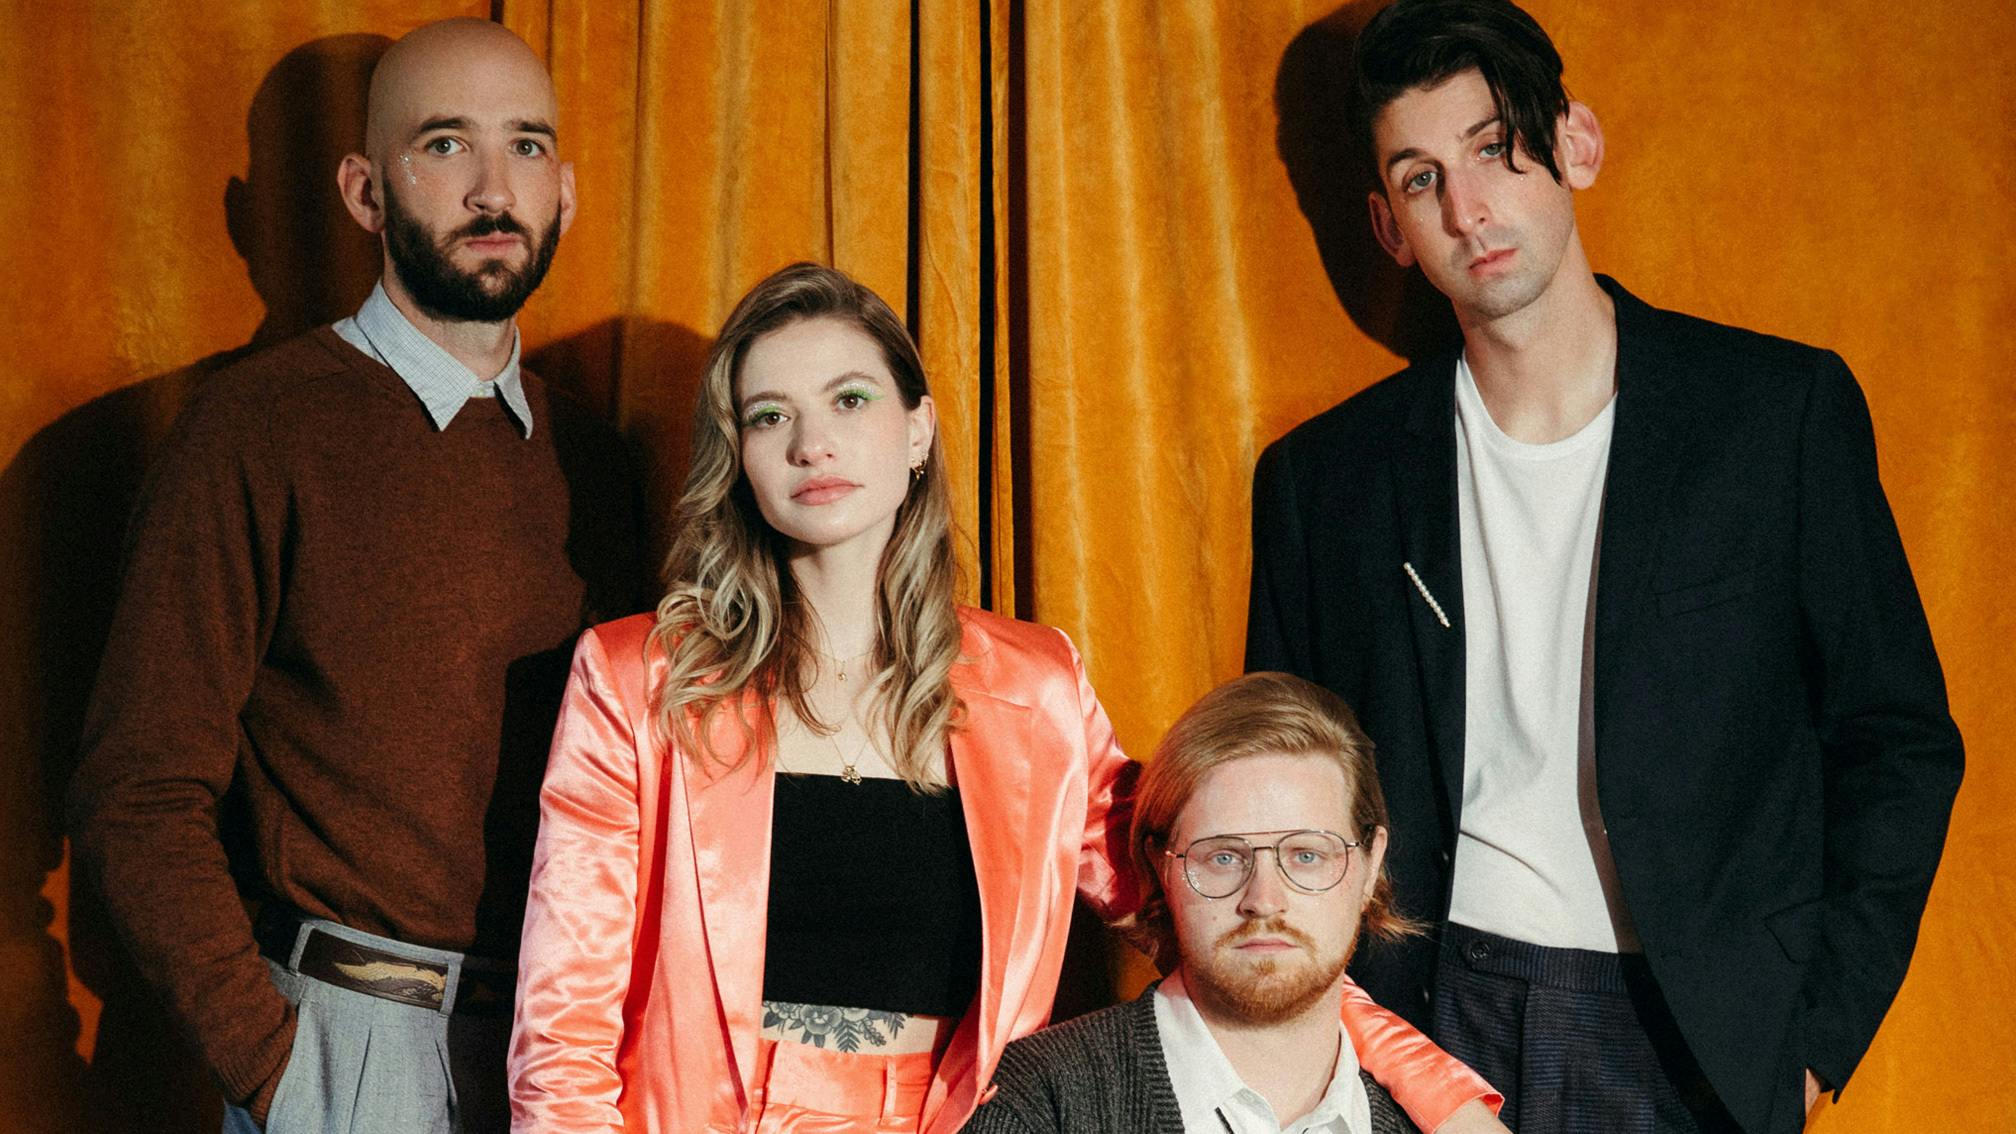 Tigers Jaw Announce New Album, I Won’t Care How You Remember Me